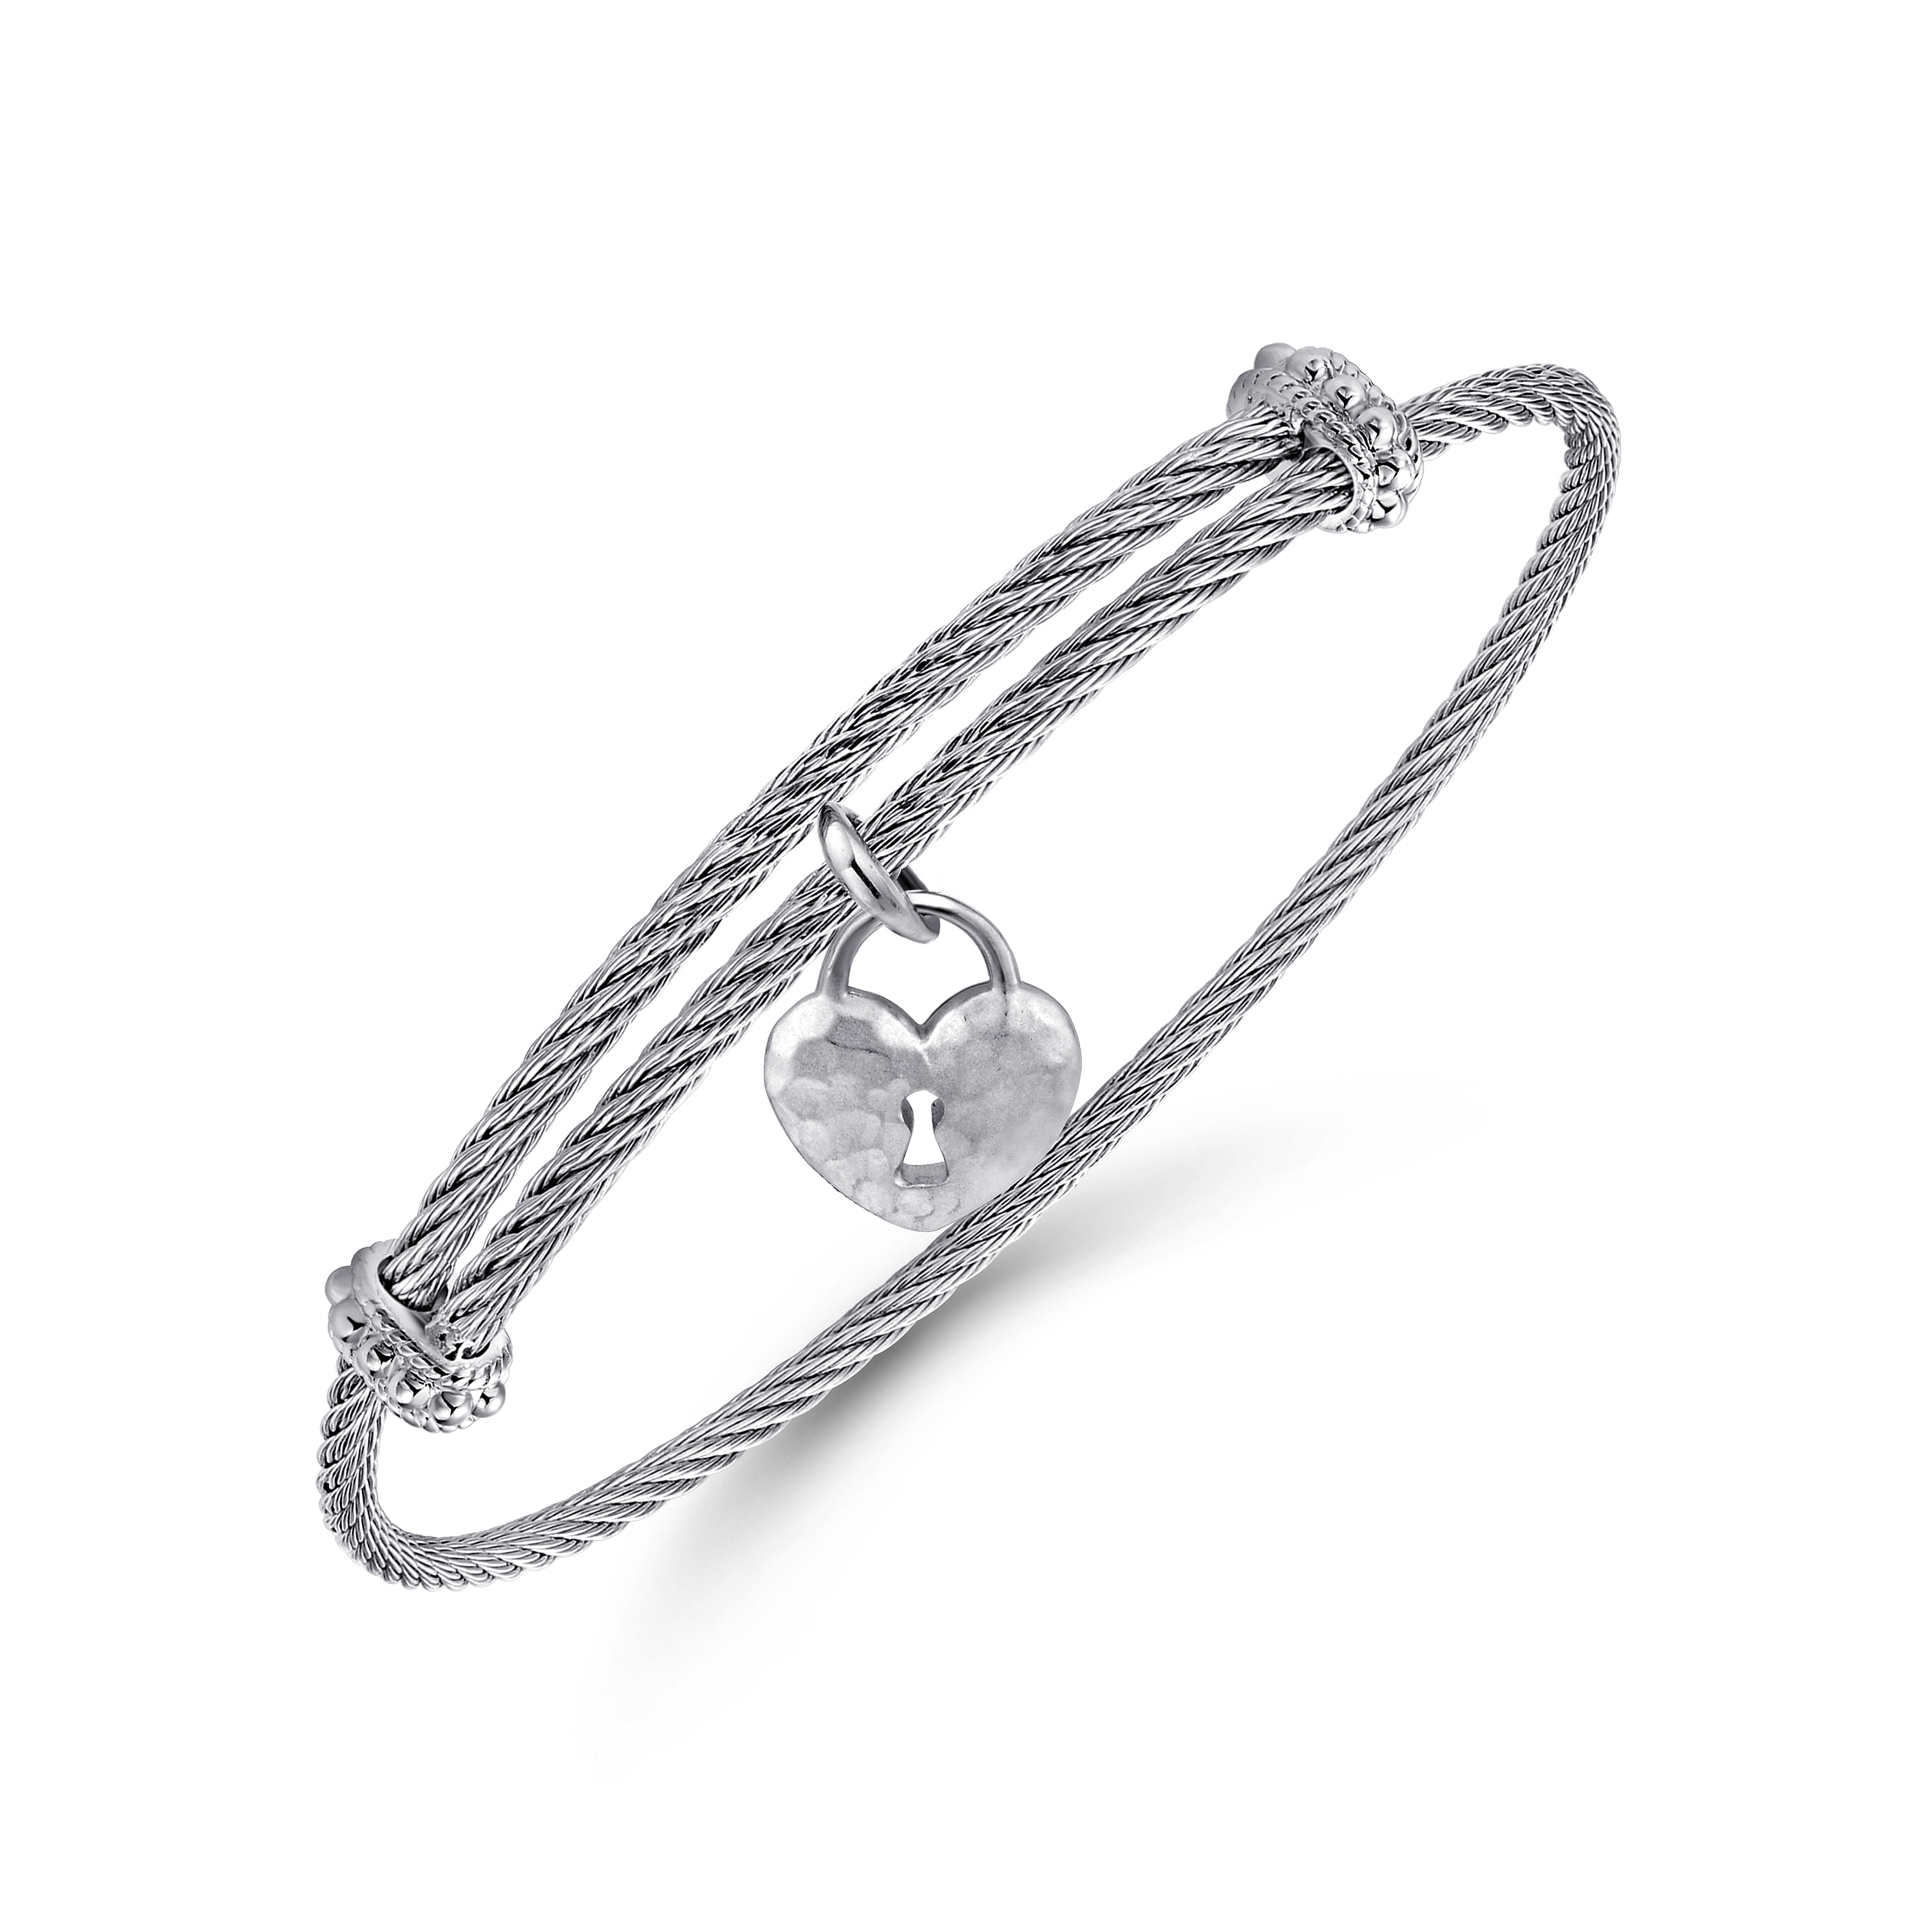 Adjustable-Twisted-Cable-Stainless-Steel-Bangle-with-Sterling-Silver-Heart-Lock-Charm2